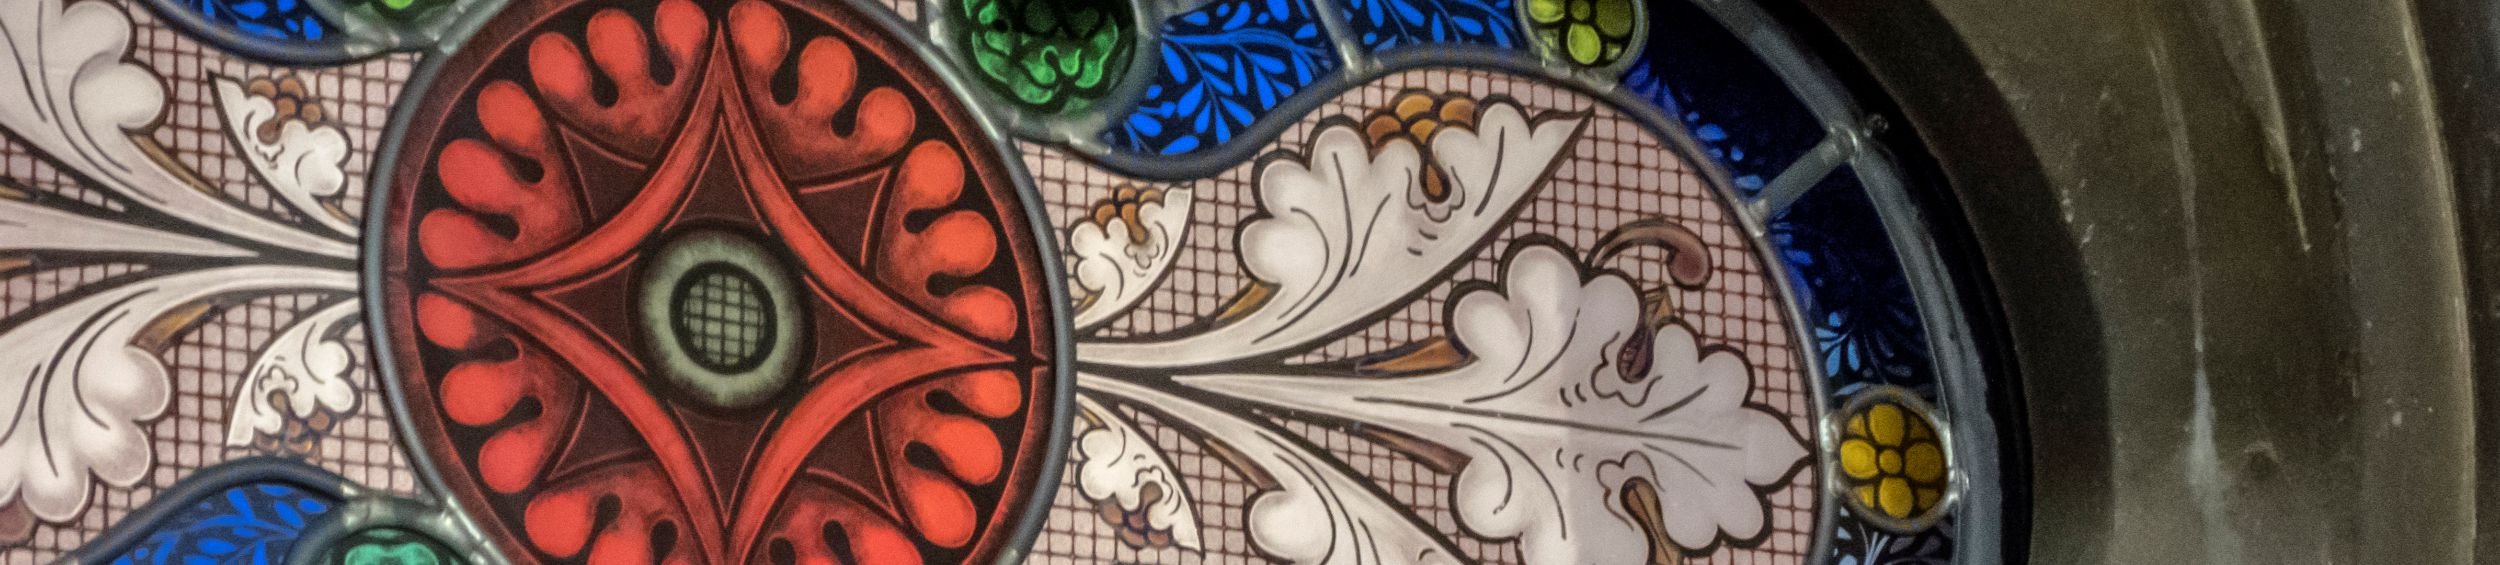 Stained Glass Banner Image